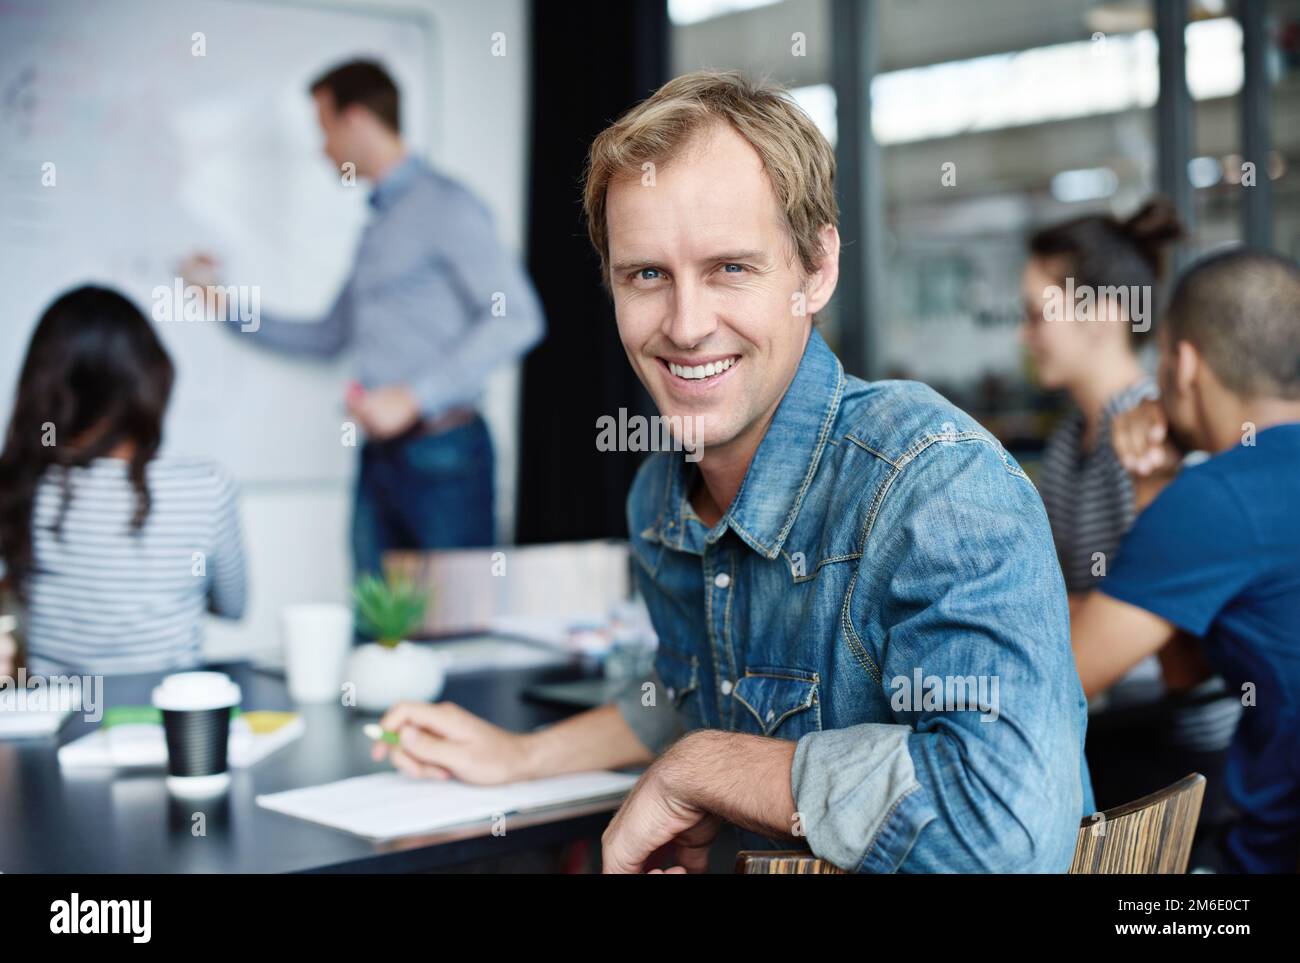 We make ideas a reality. Portrait of an office worker with his colleagues sitting in the background. Stock Photo